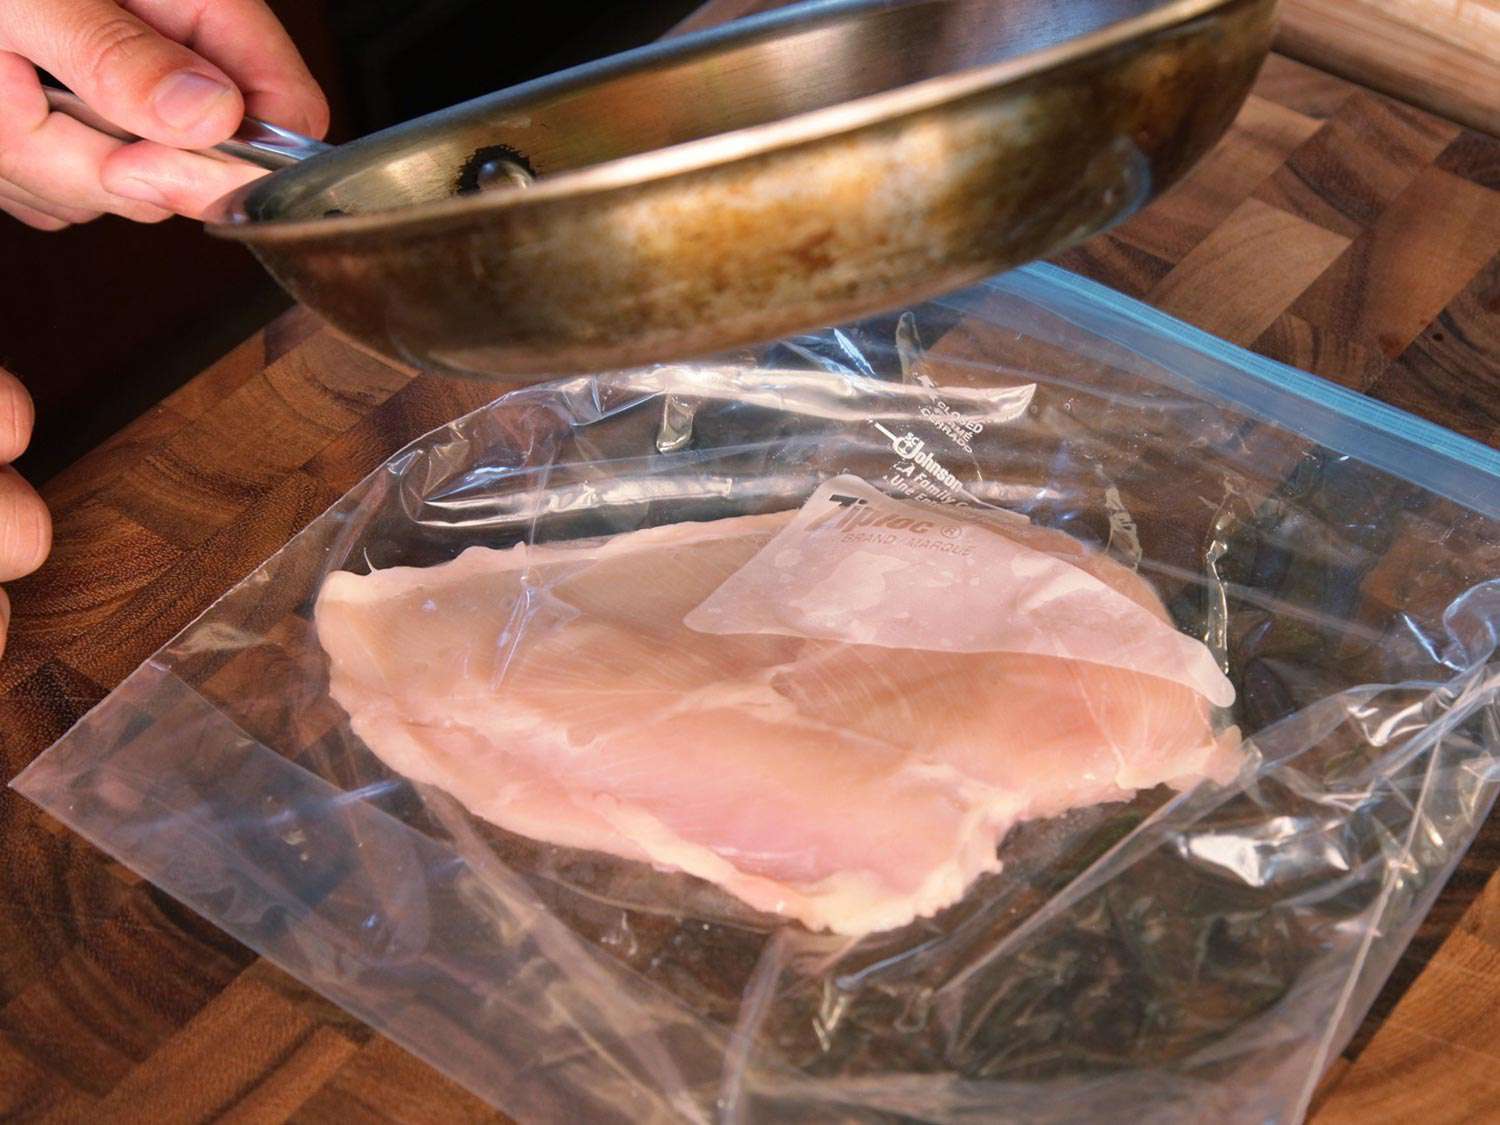 Pounding chicken breast in resealable plastic bag with heavy bottom frying pan